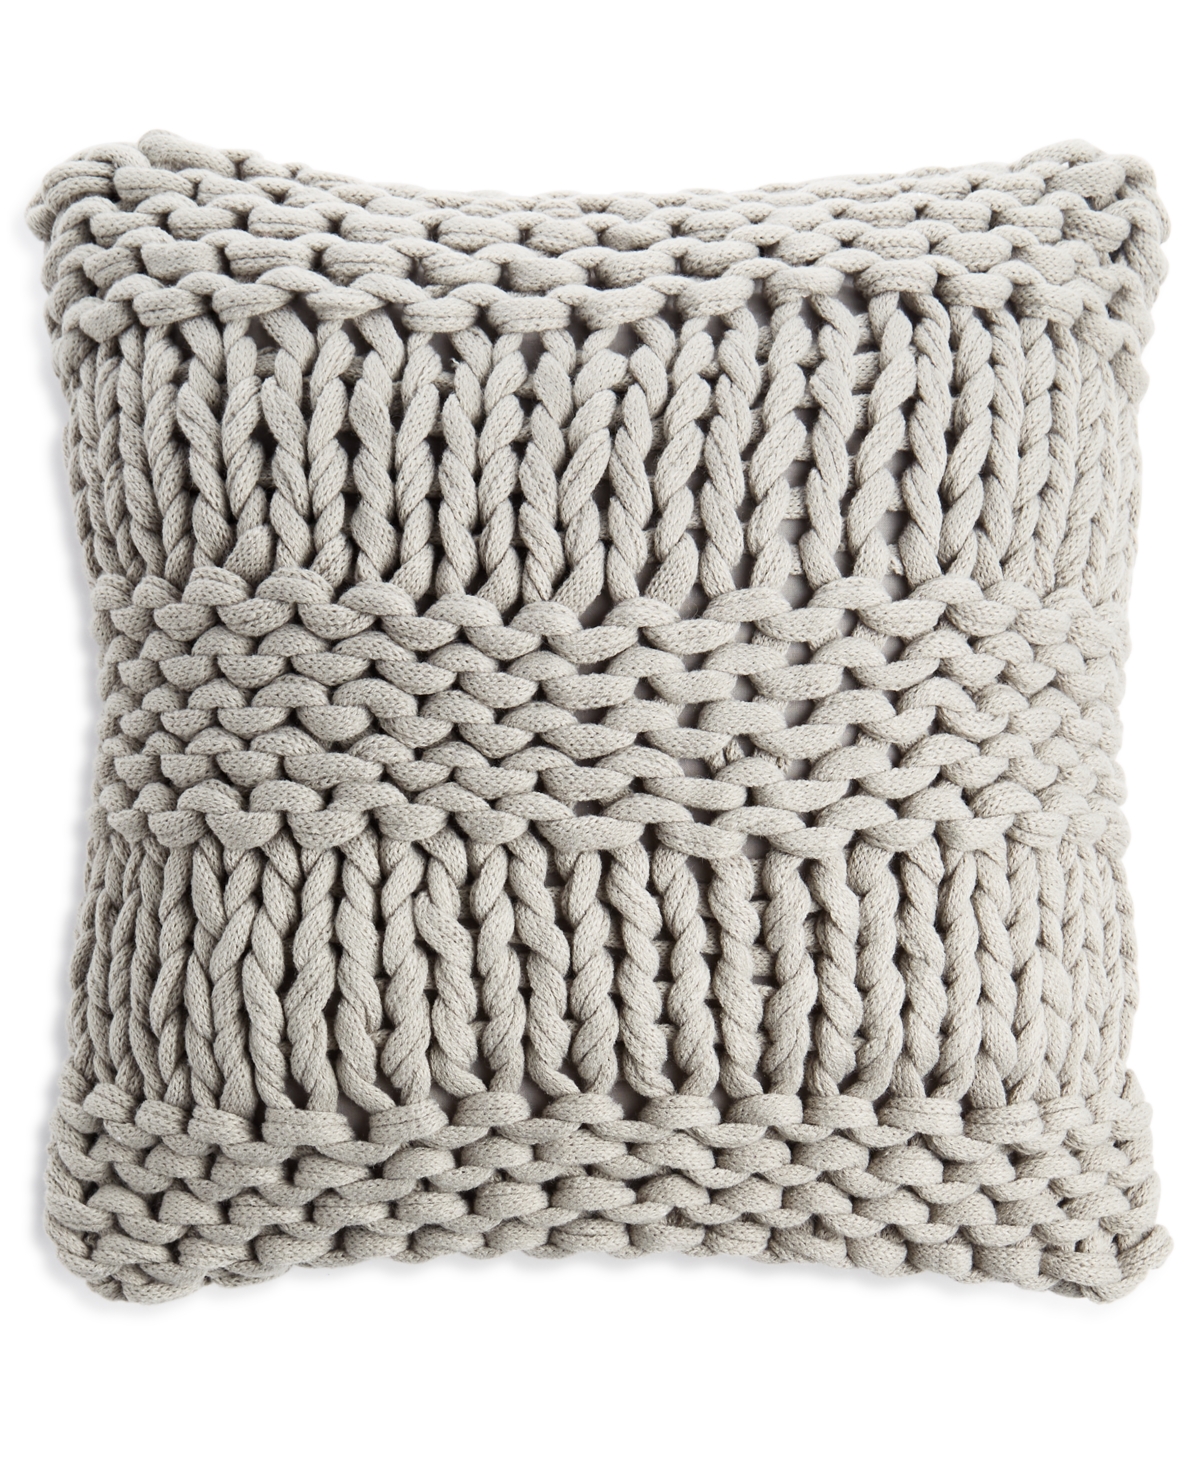 18 x 18 Oake Chunky Knit Decorative Pillow (3 Colors) $14.96 + Free Store  Pickup at Macy's or FS on $25+